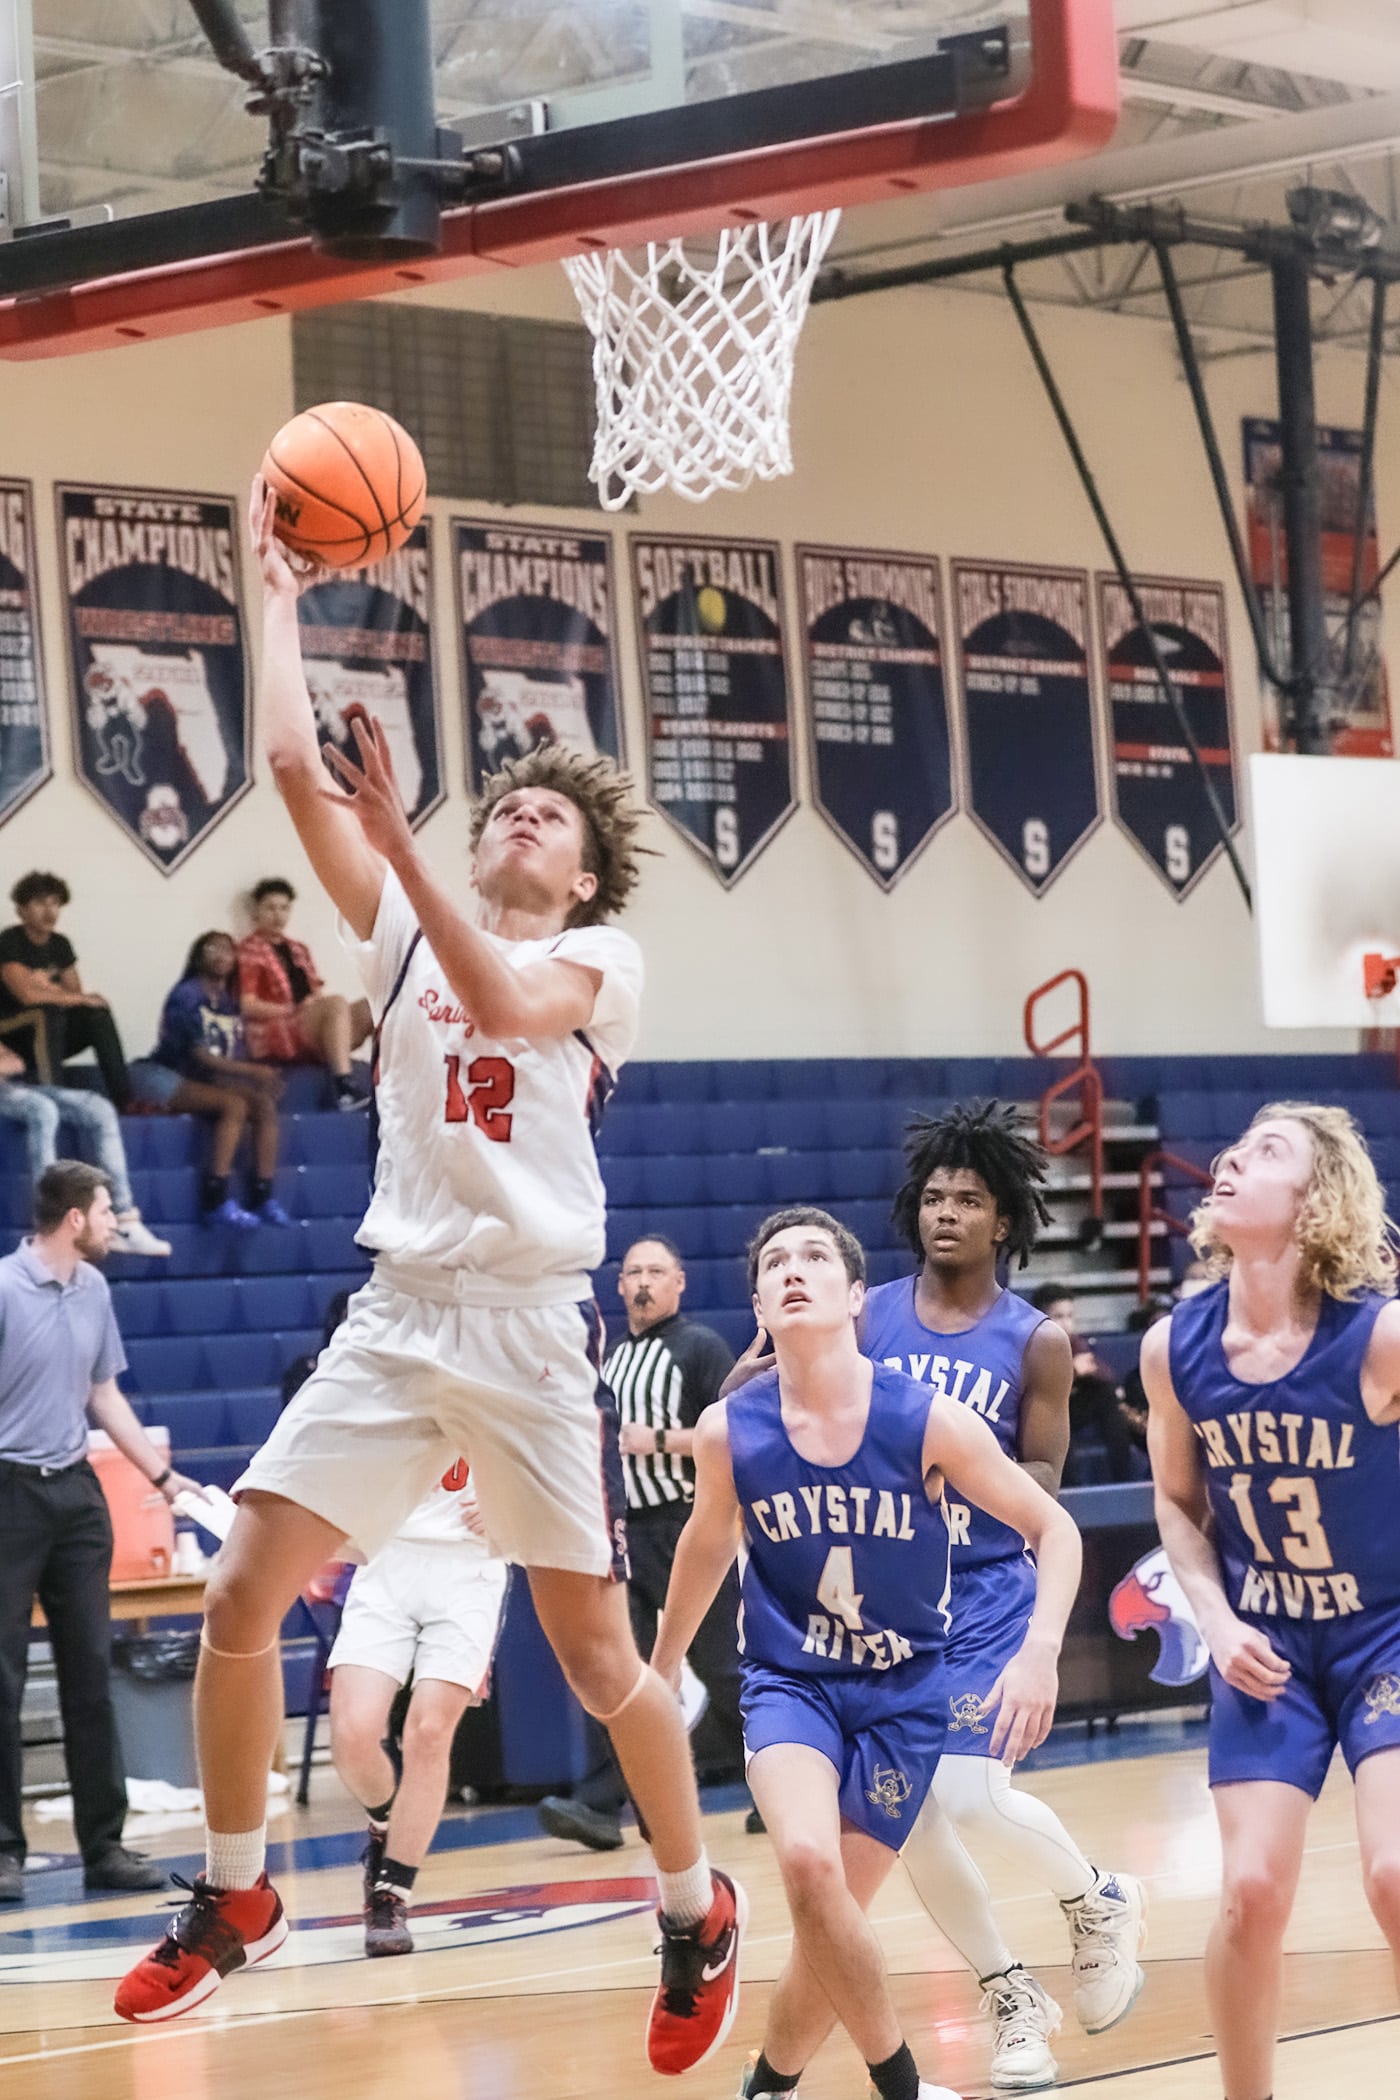 Eagles' #12 Jr. Austin Nicholson takes the ball down court and goes in for the point against Crystal River Tuesday night. Photos by Cheryl Clanton.